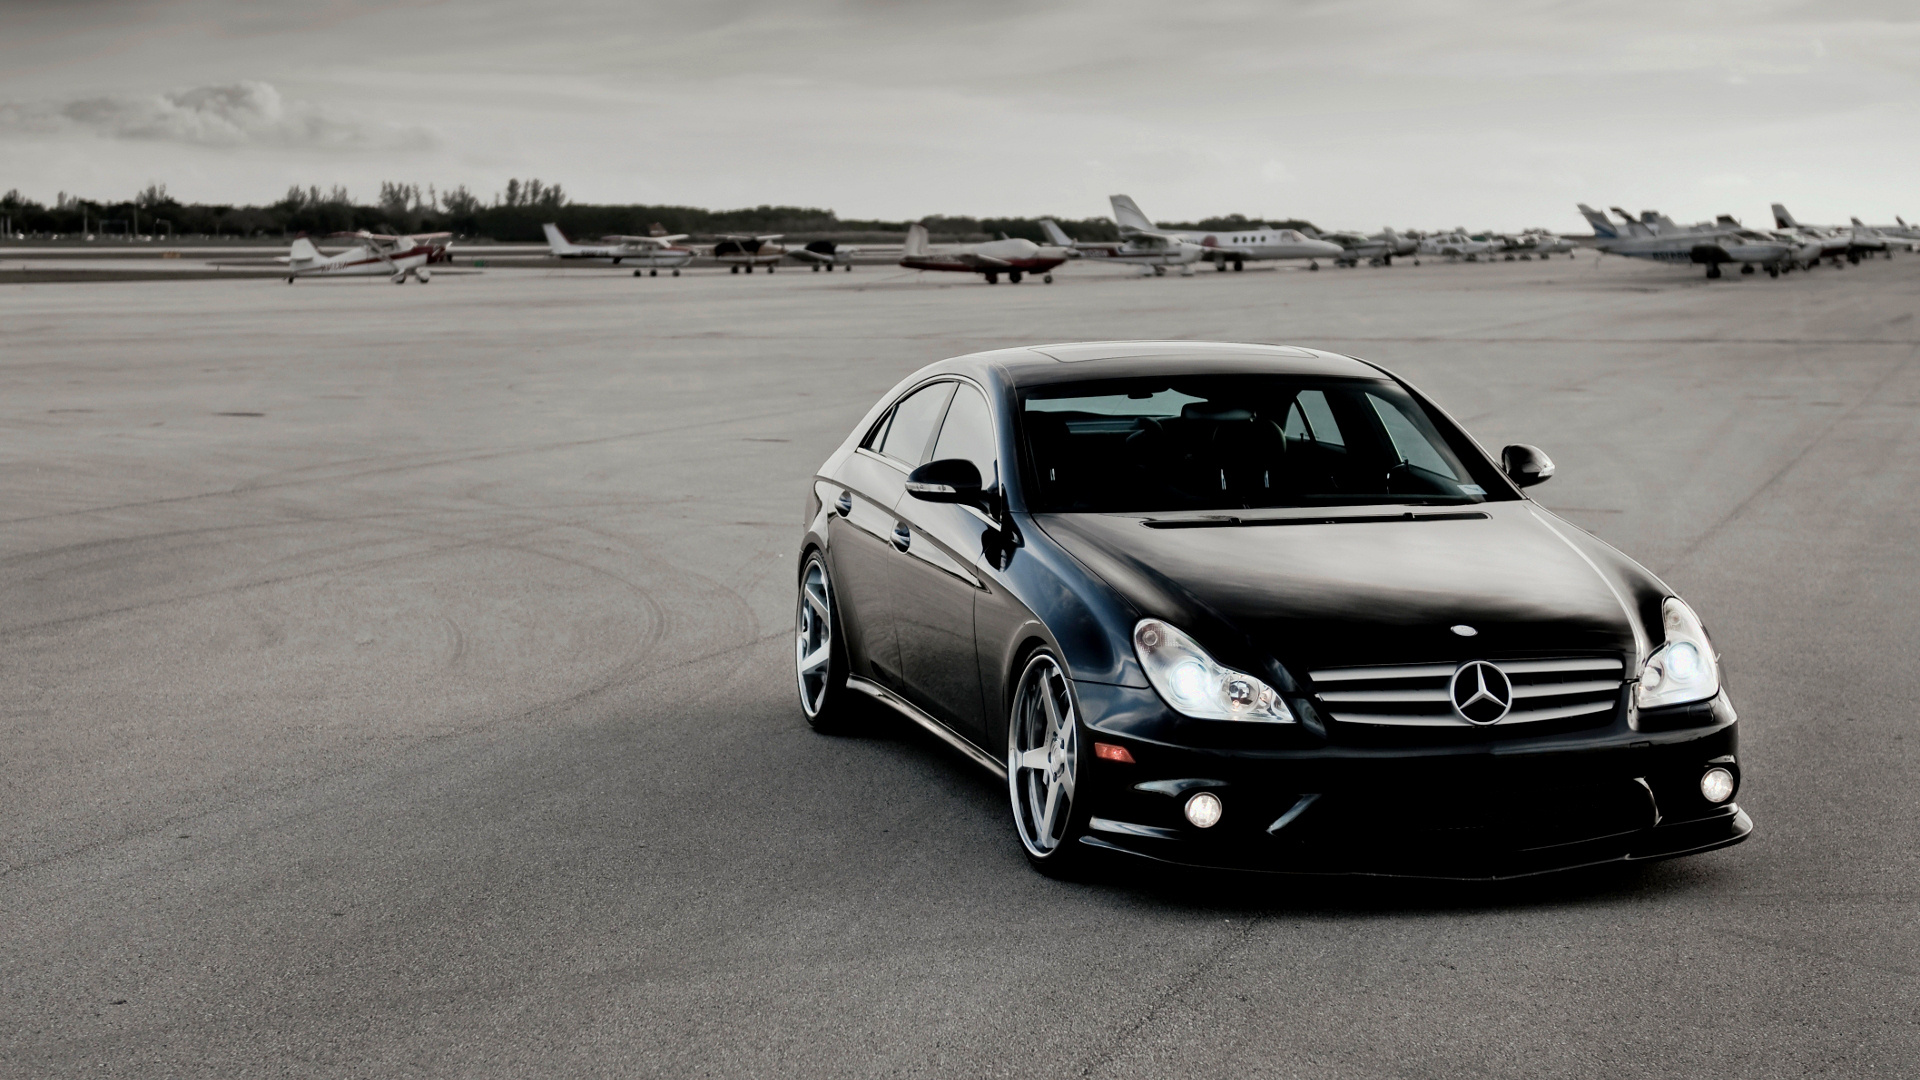 Mercedes-Benz CLS, Iconic design, Cutting-edge technology, Unmatched luxury, 1920x1080 Full HD Desktop